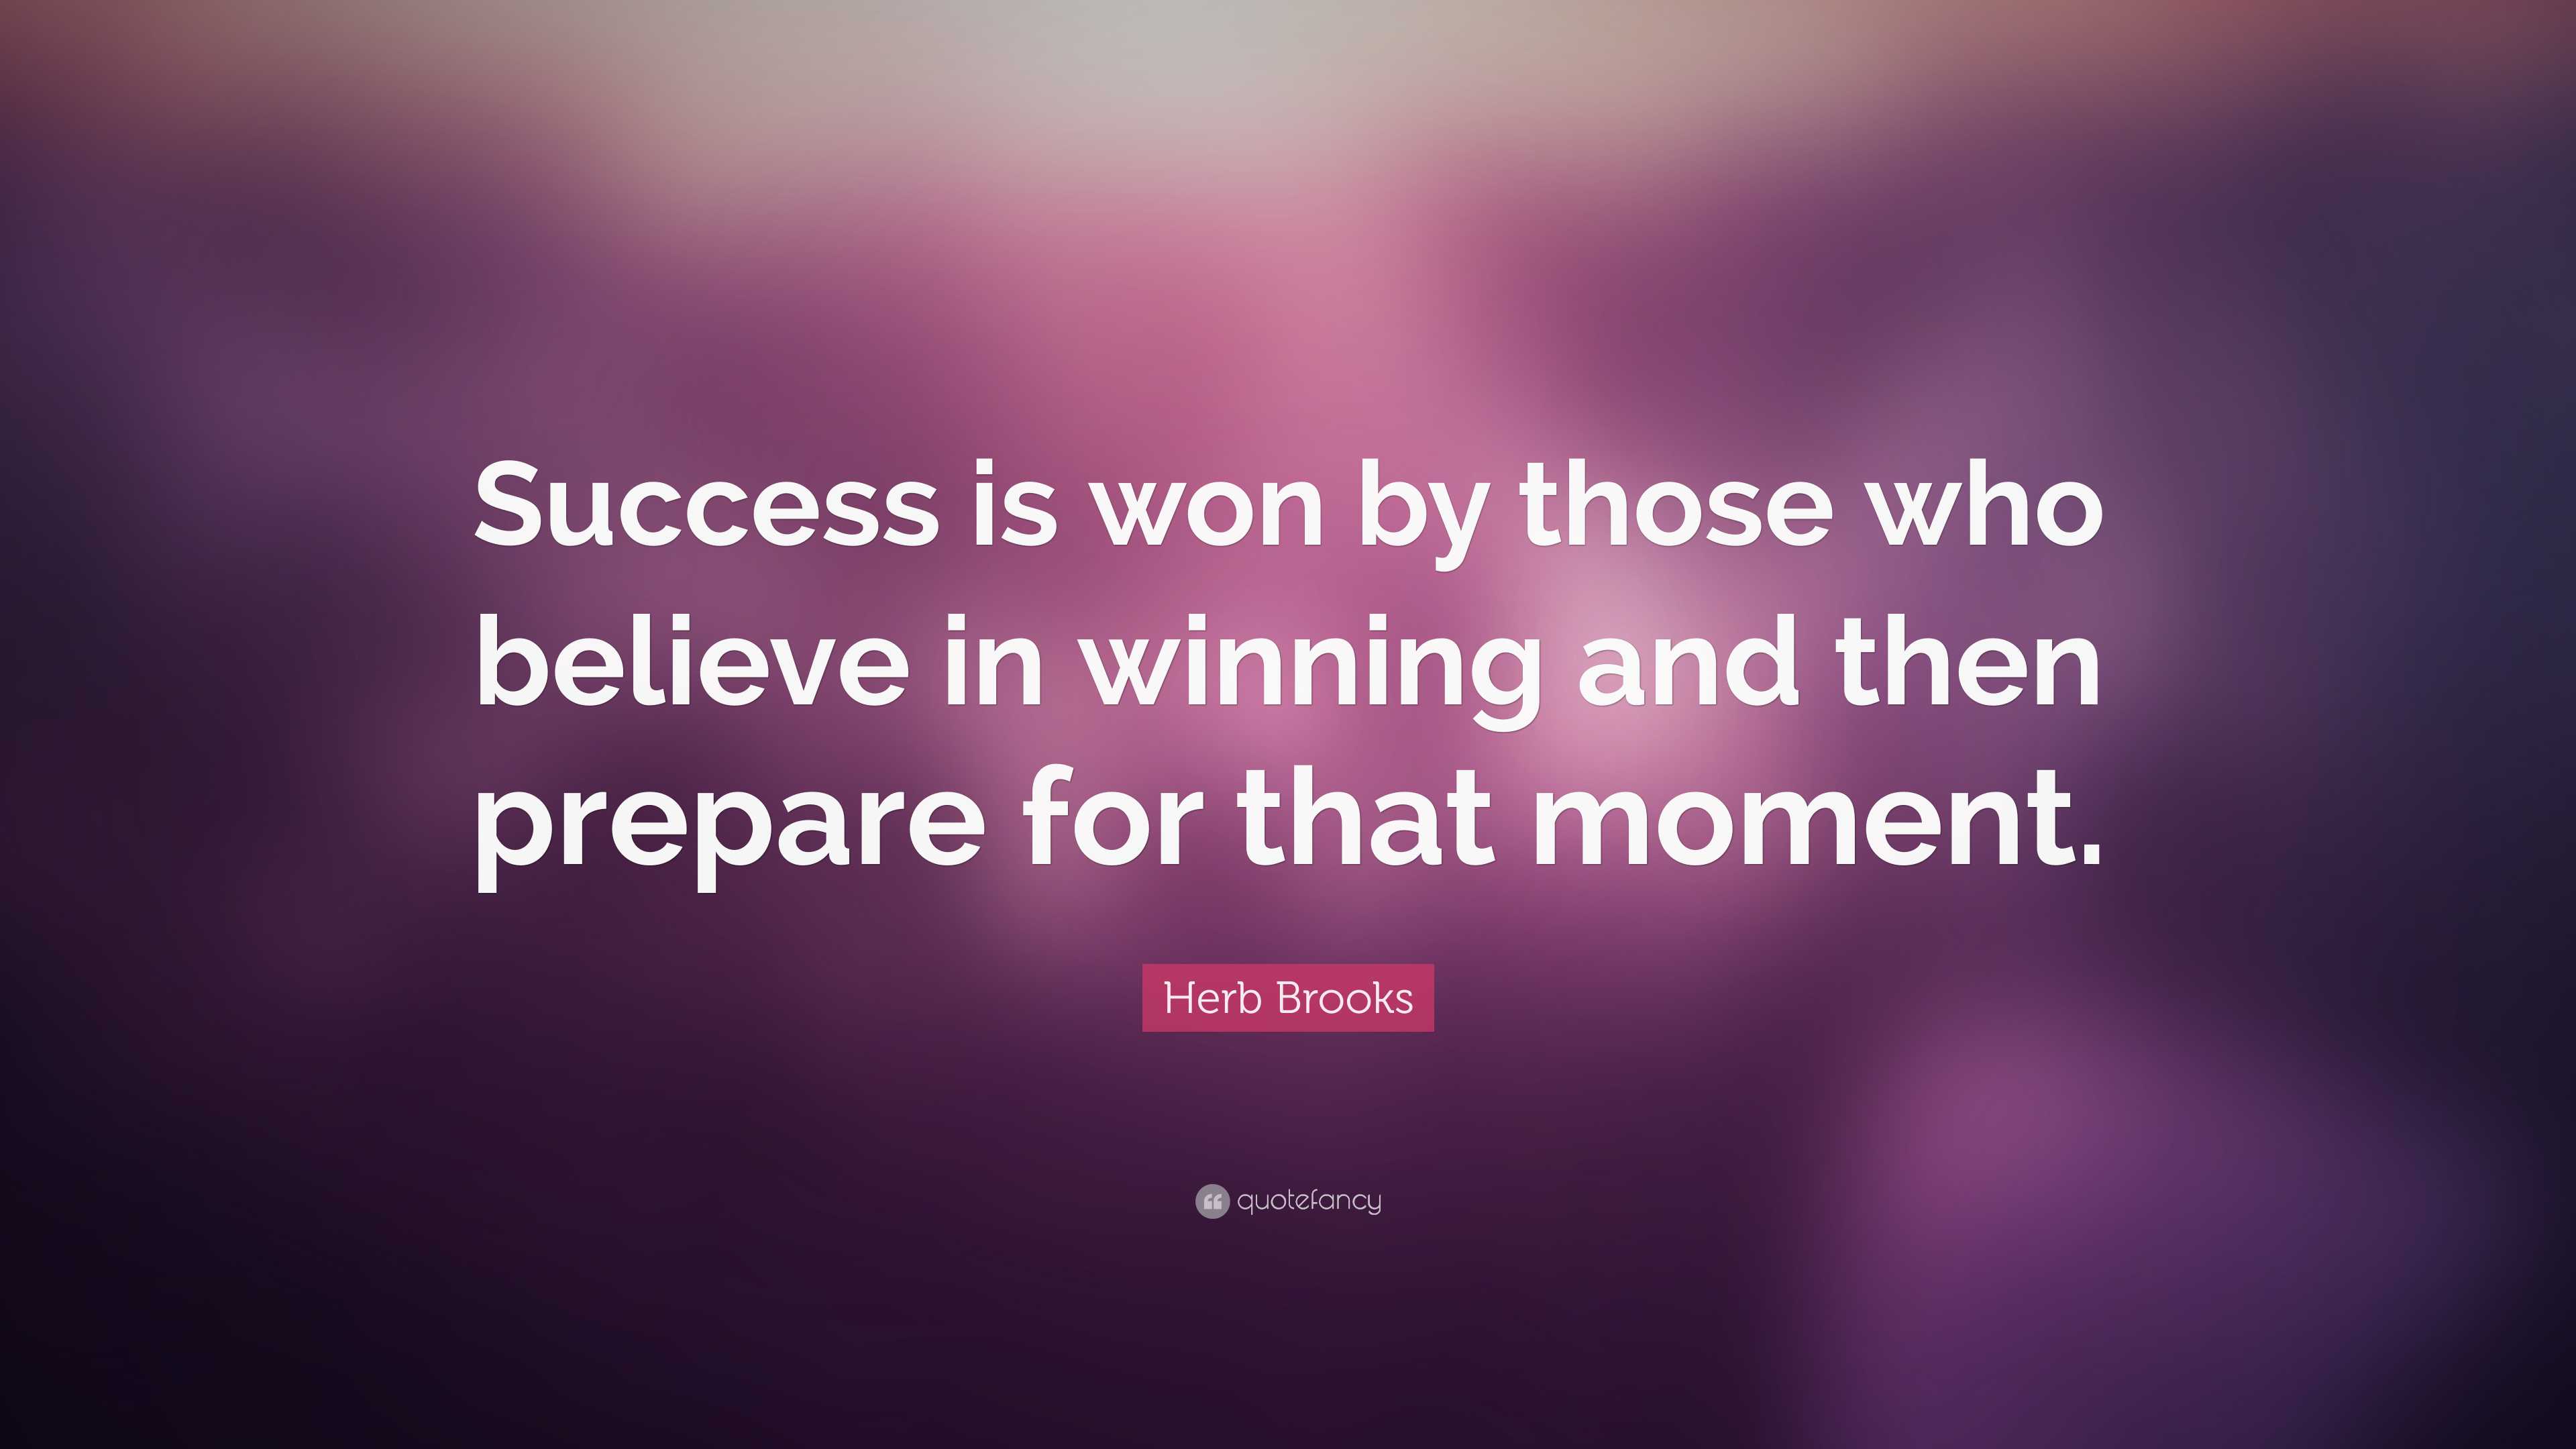 Herb Brooks Quote: “Success is won by those who believe in winning and ...